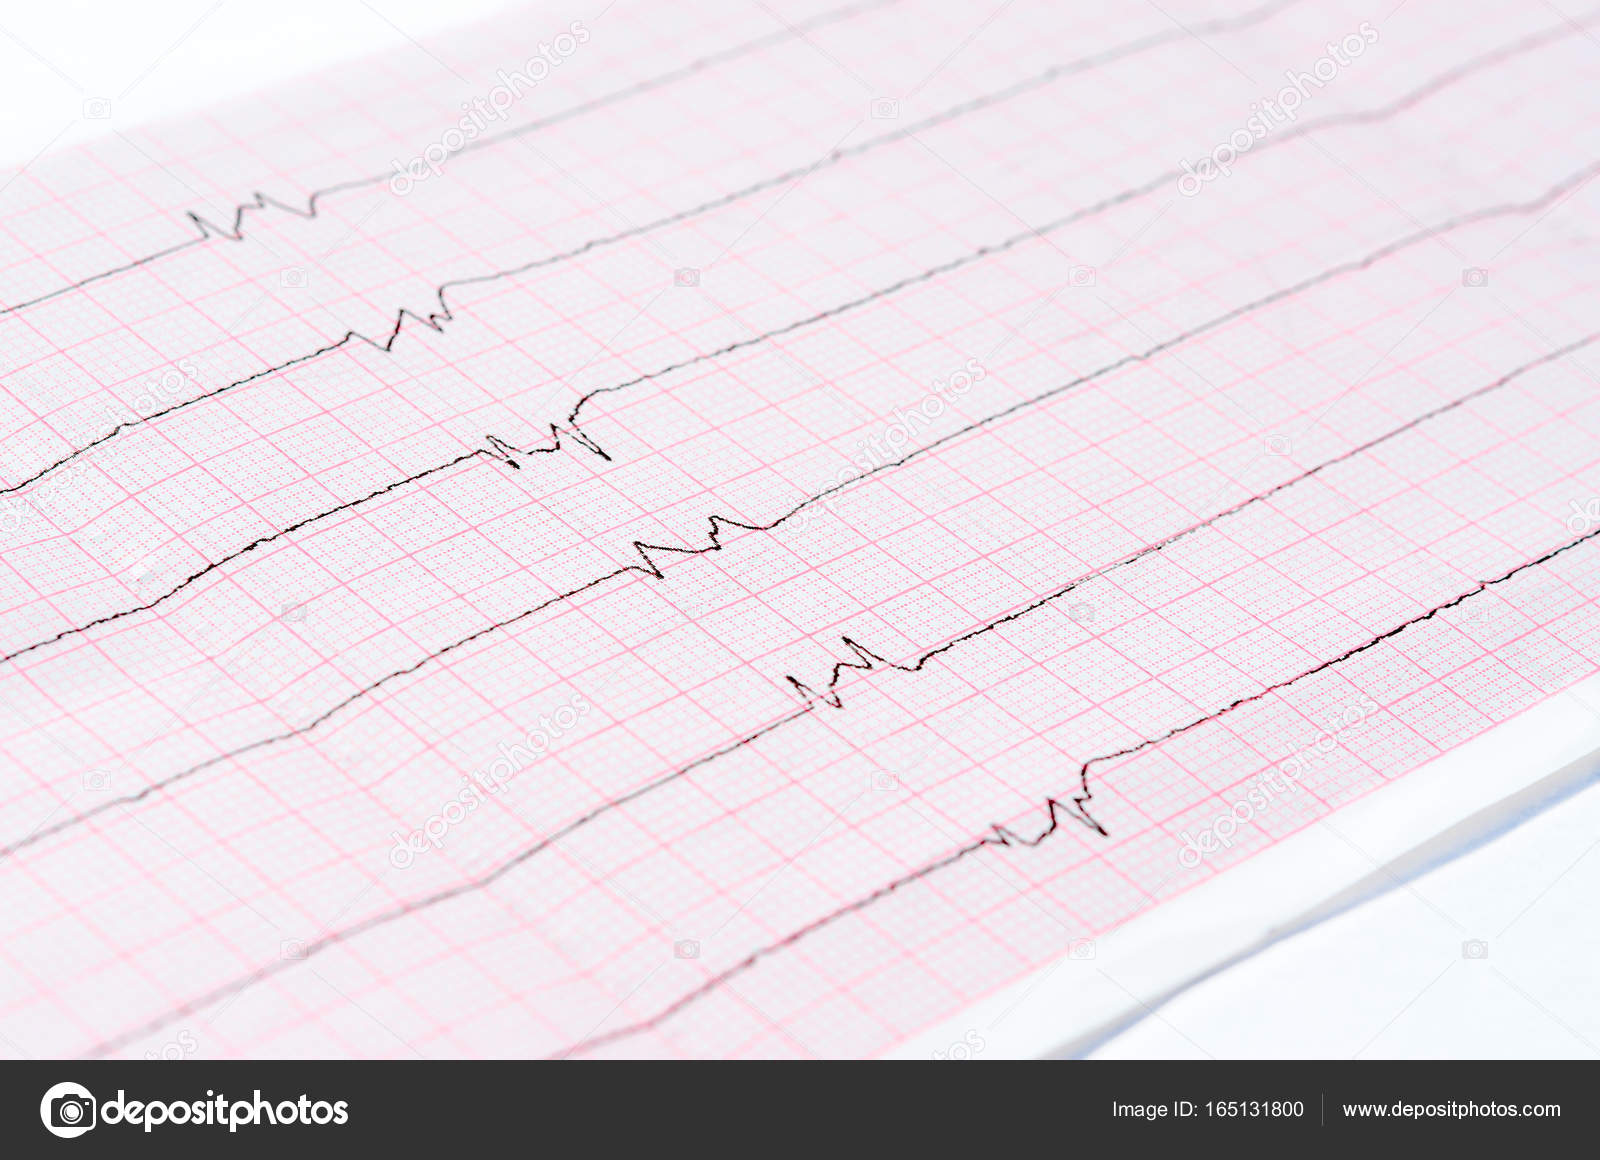 Ecg With Single Ventricular Complexes And Ventricular Asystole Dying Heart Stock Photo Image By C Olga355